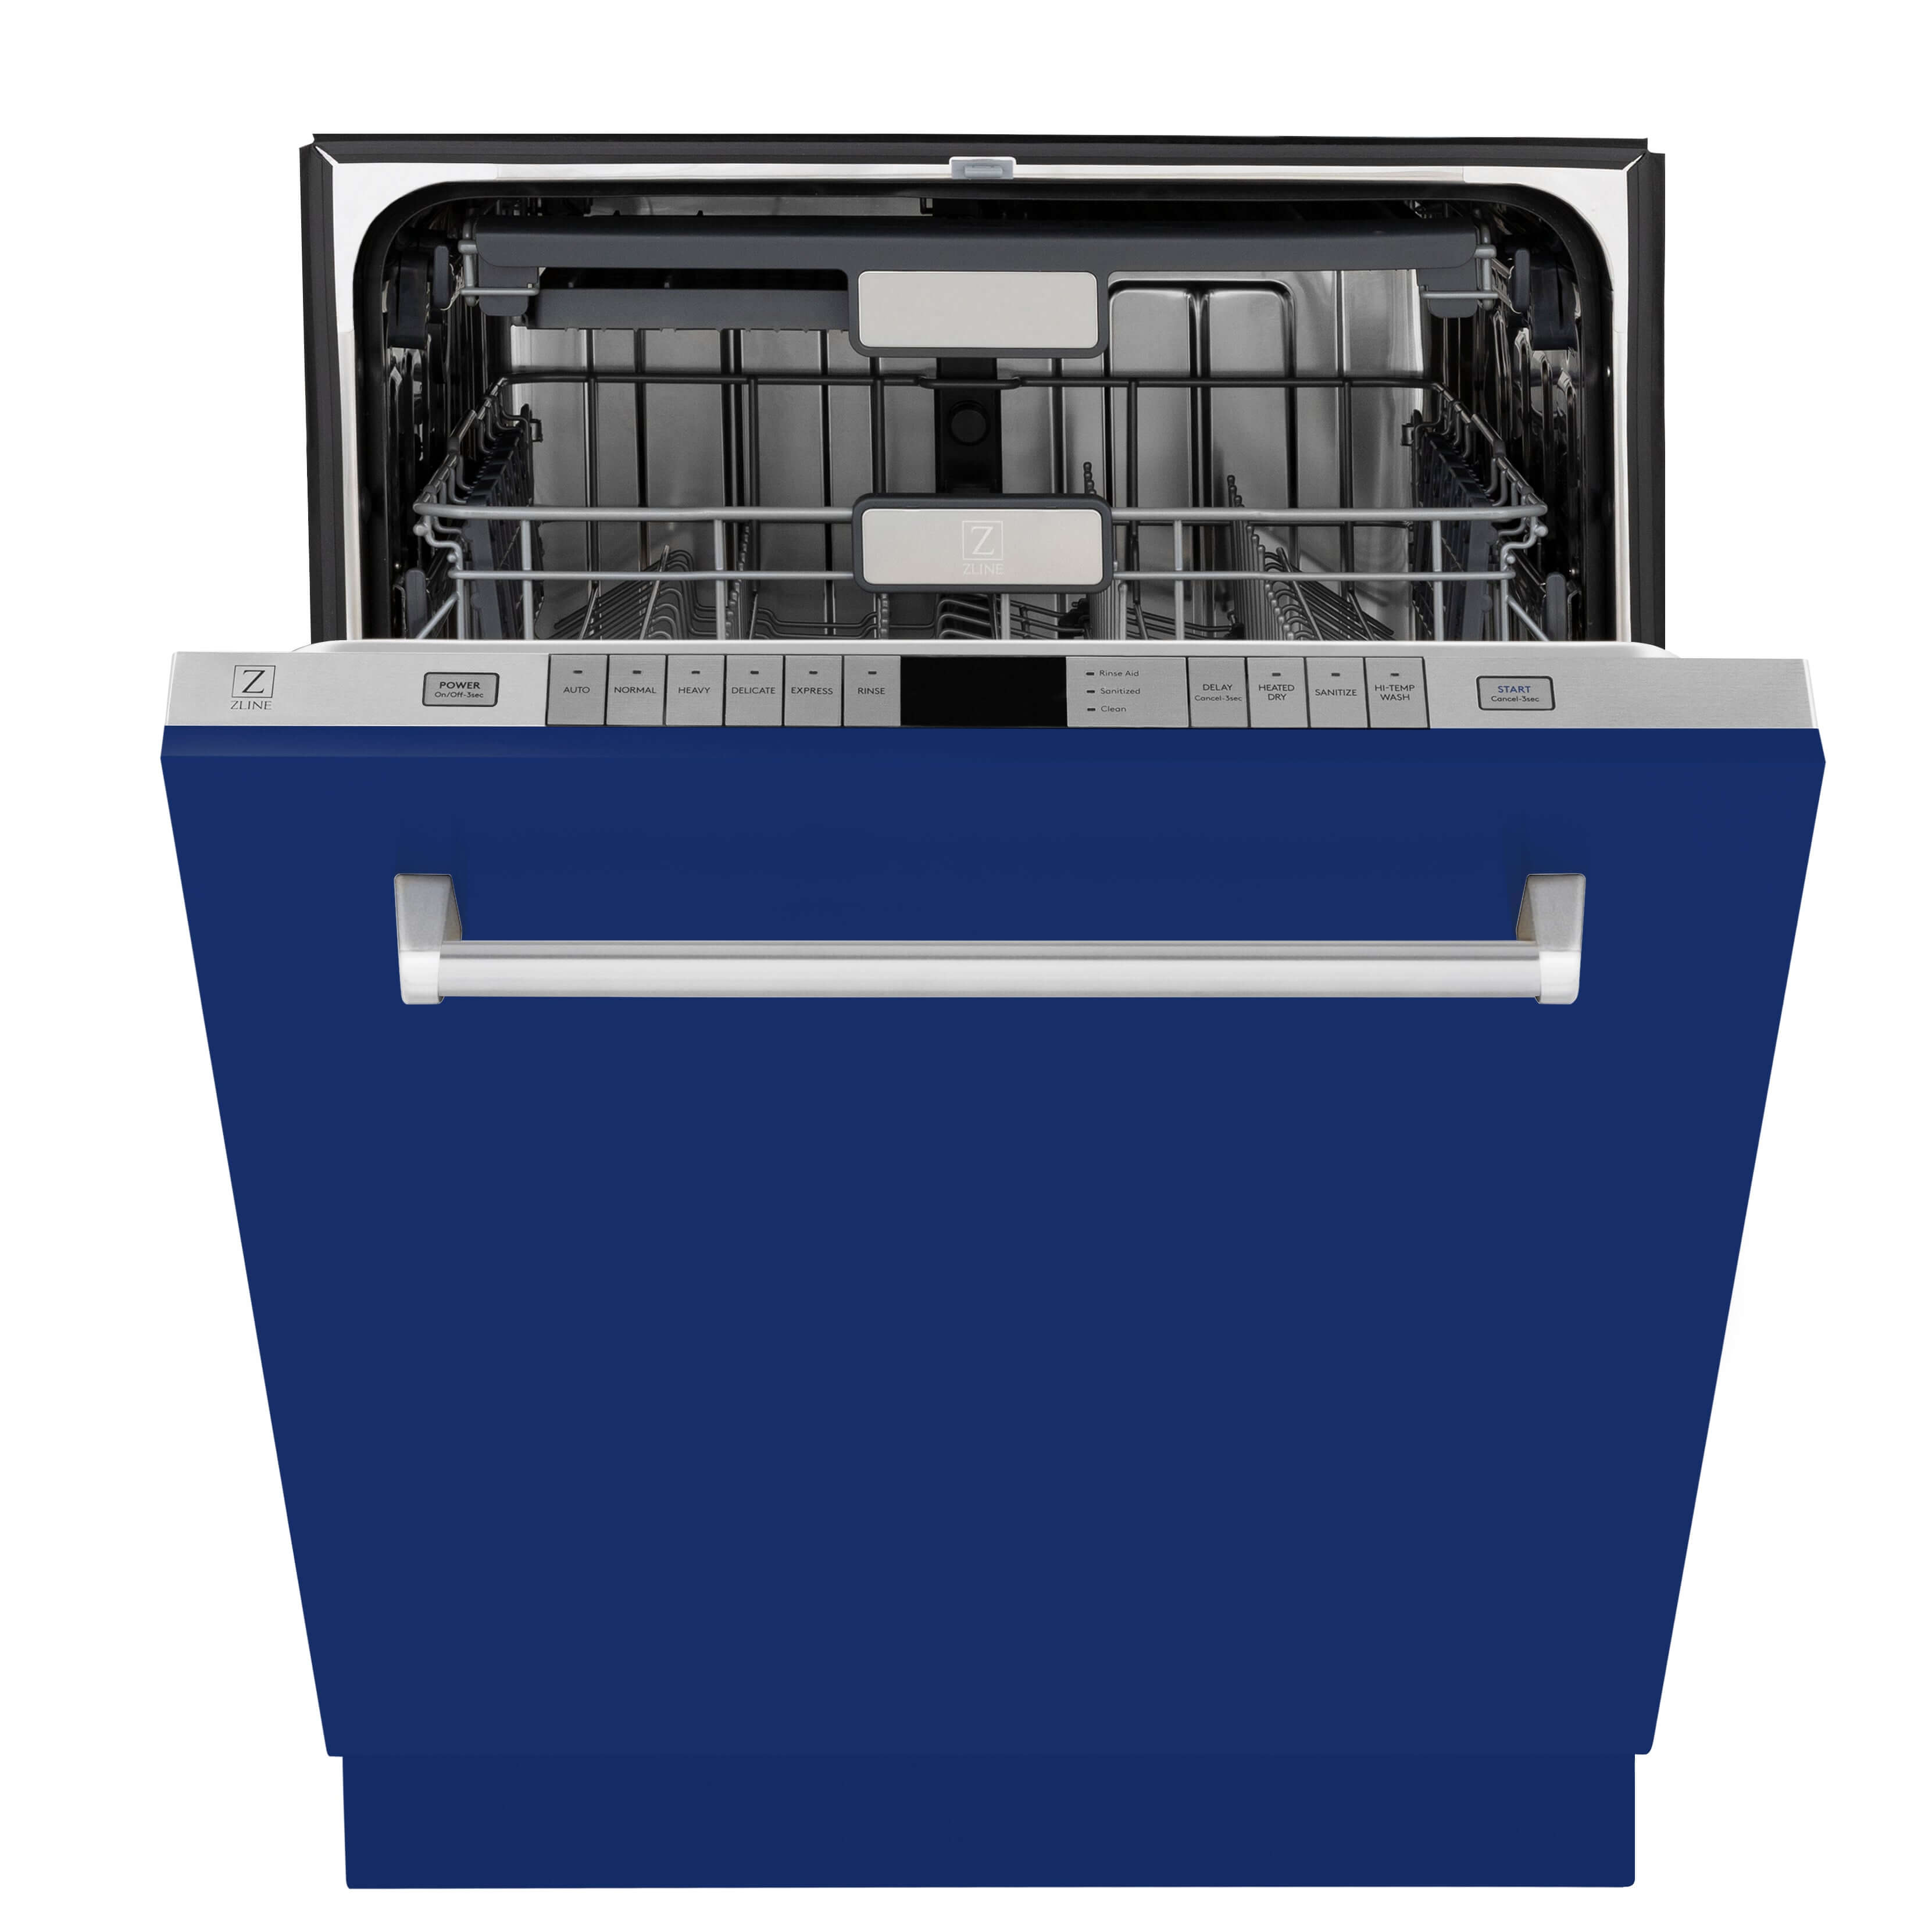  ZLINE 24 in. Monument Dishwasher with Blue Gloss Panel (DWMT-BG-24) Front View Door Partially Open